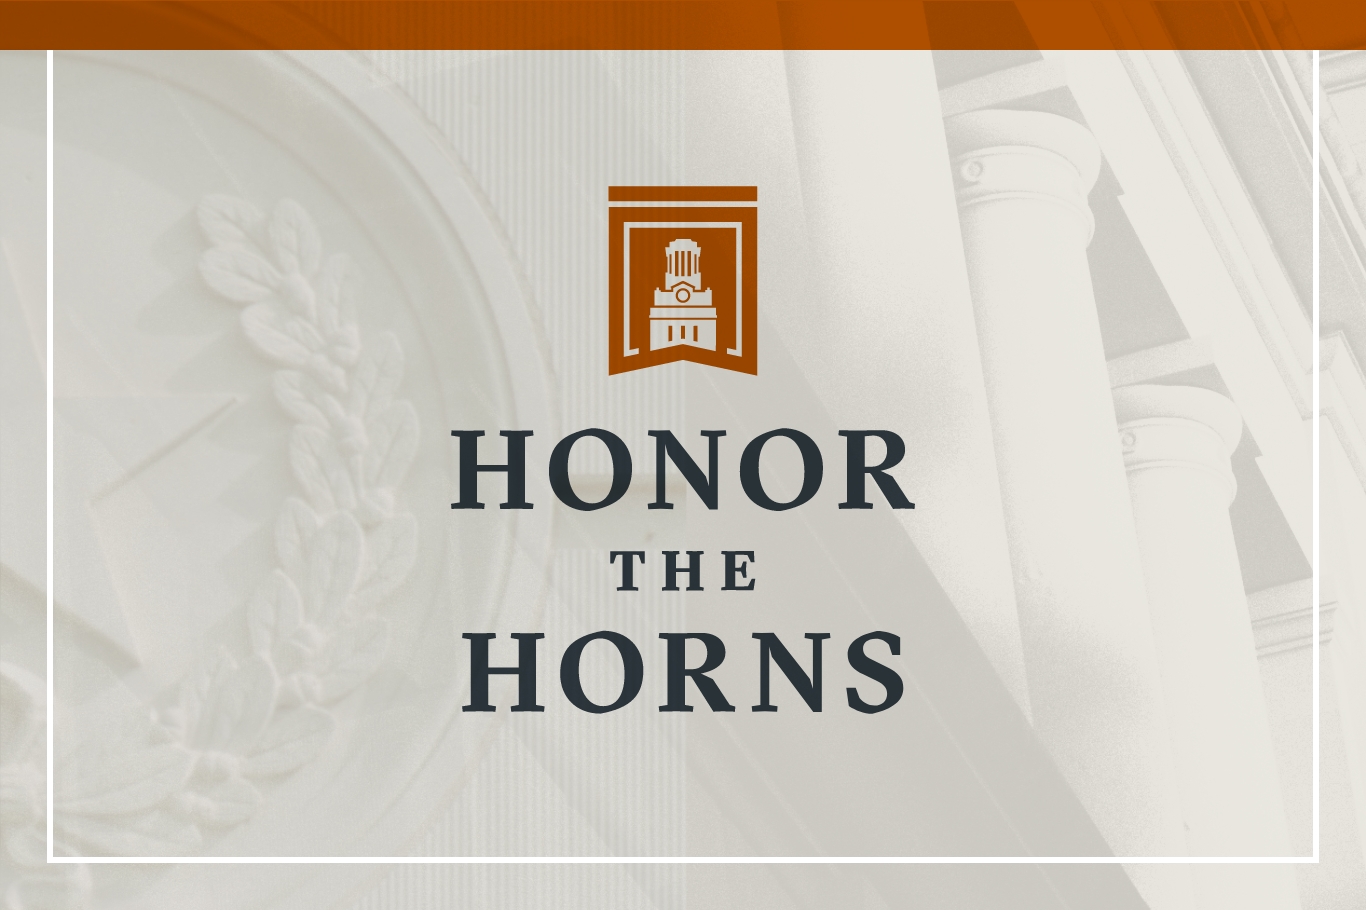 Honor the Horns